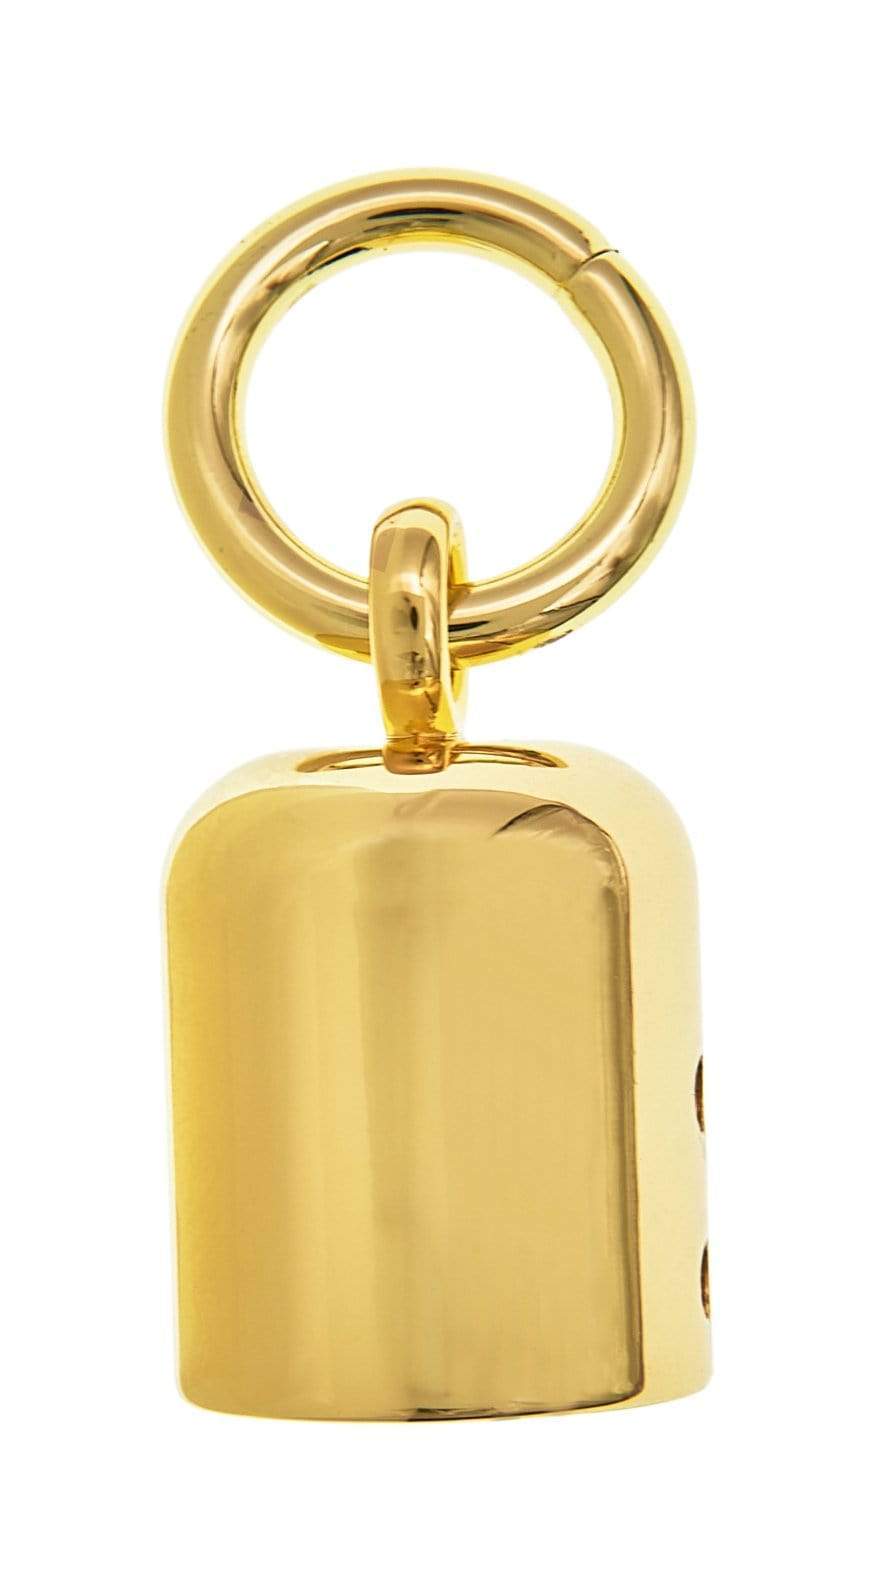 Ohio Travel Bag Strapping 1/2" Gold, Purse Tassel Cover, Zinc Alloy, #P-2750-GOLD P-2750-GOLD